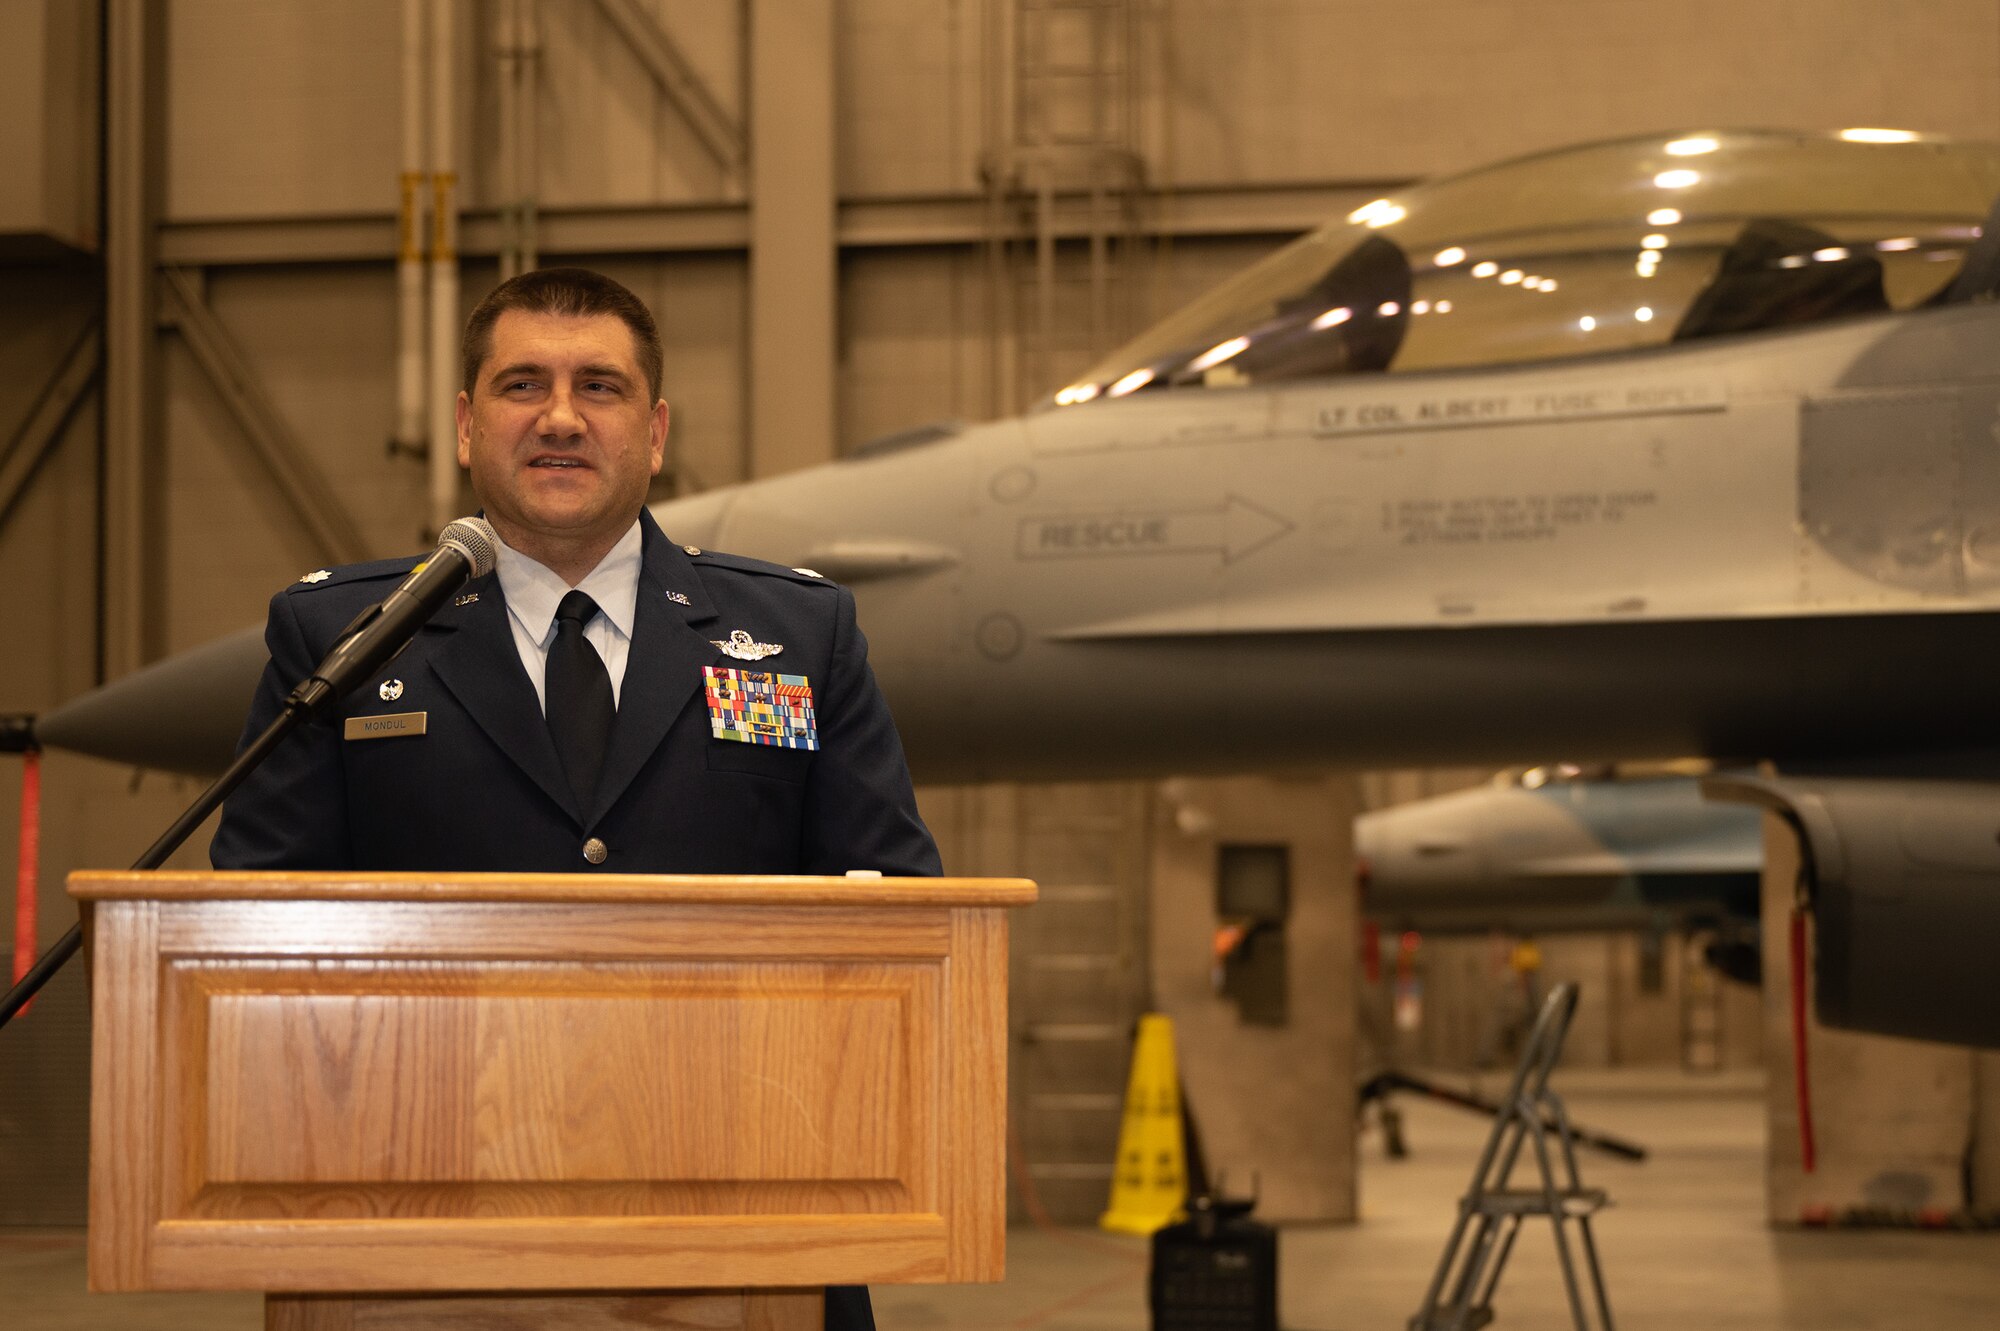 A squadron commander gives remarks during a change of command ceremony.